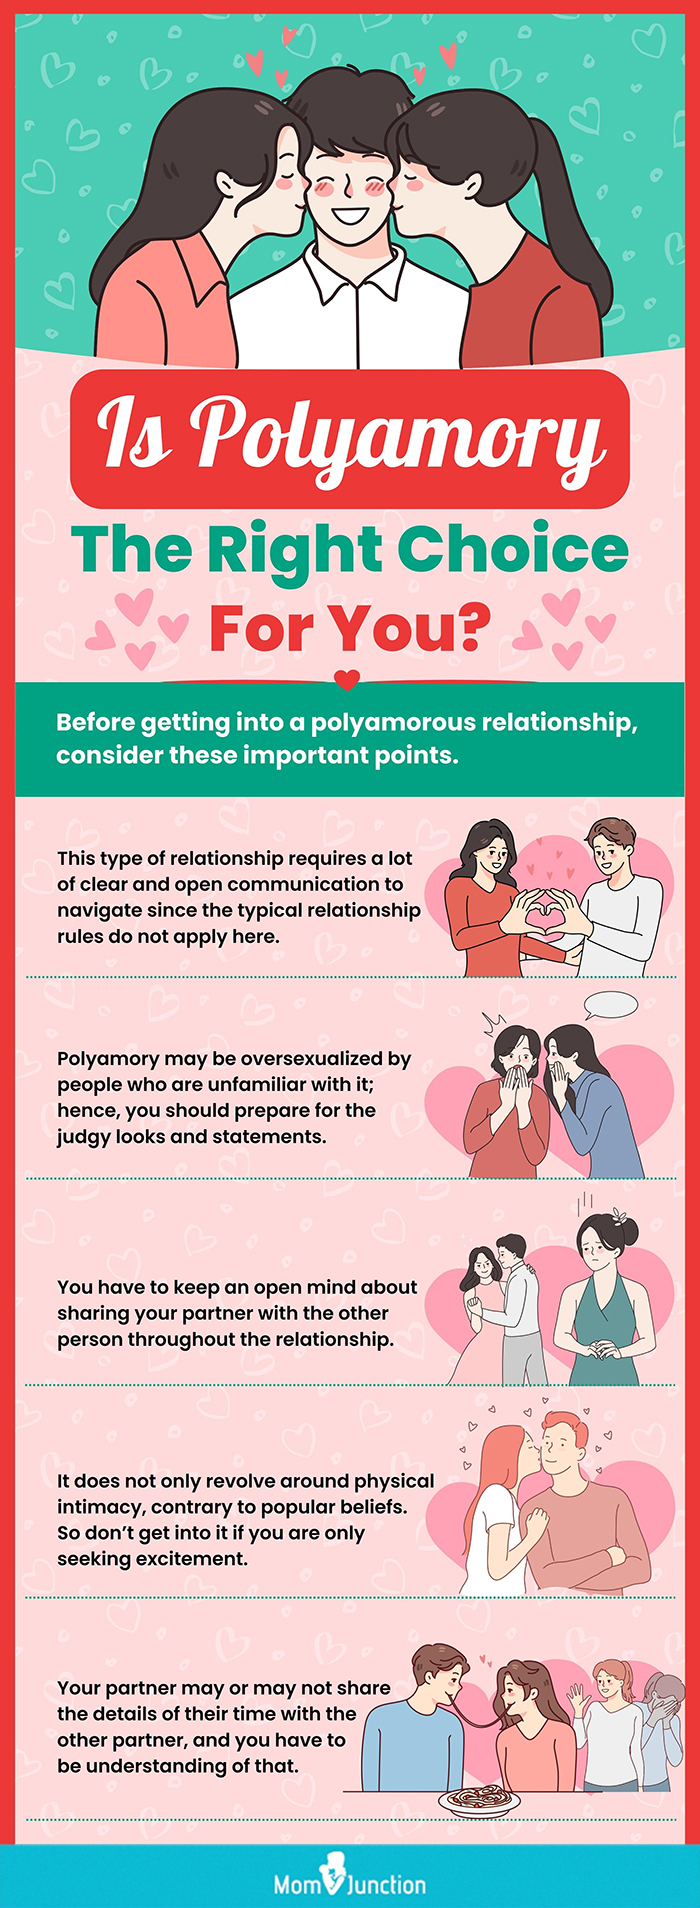 What Is a Polyamorous Relationship?